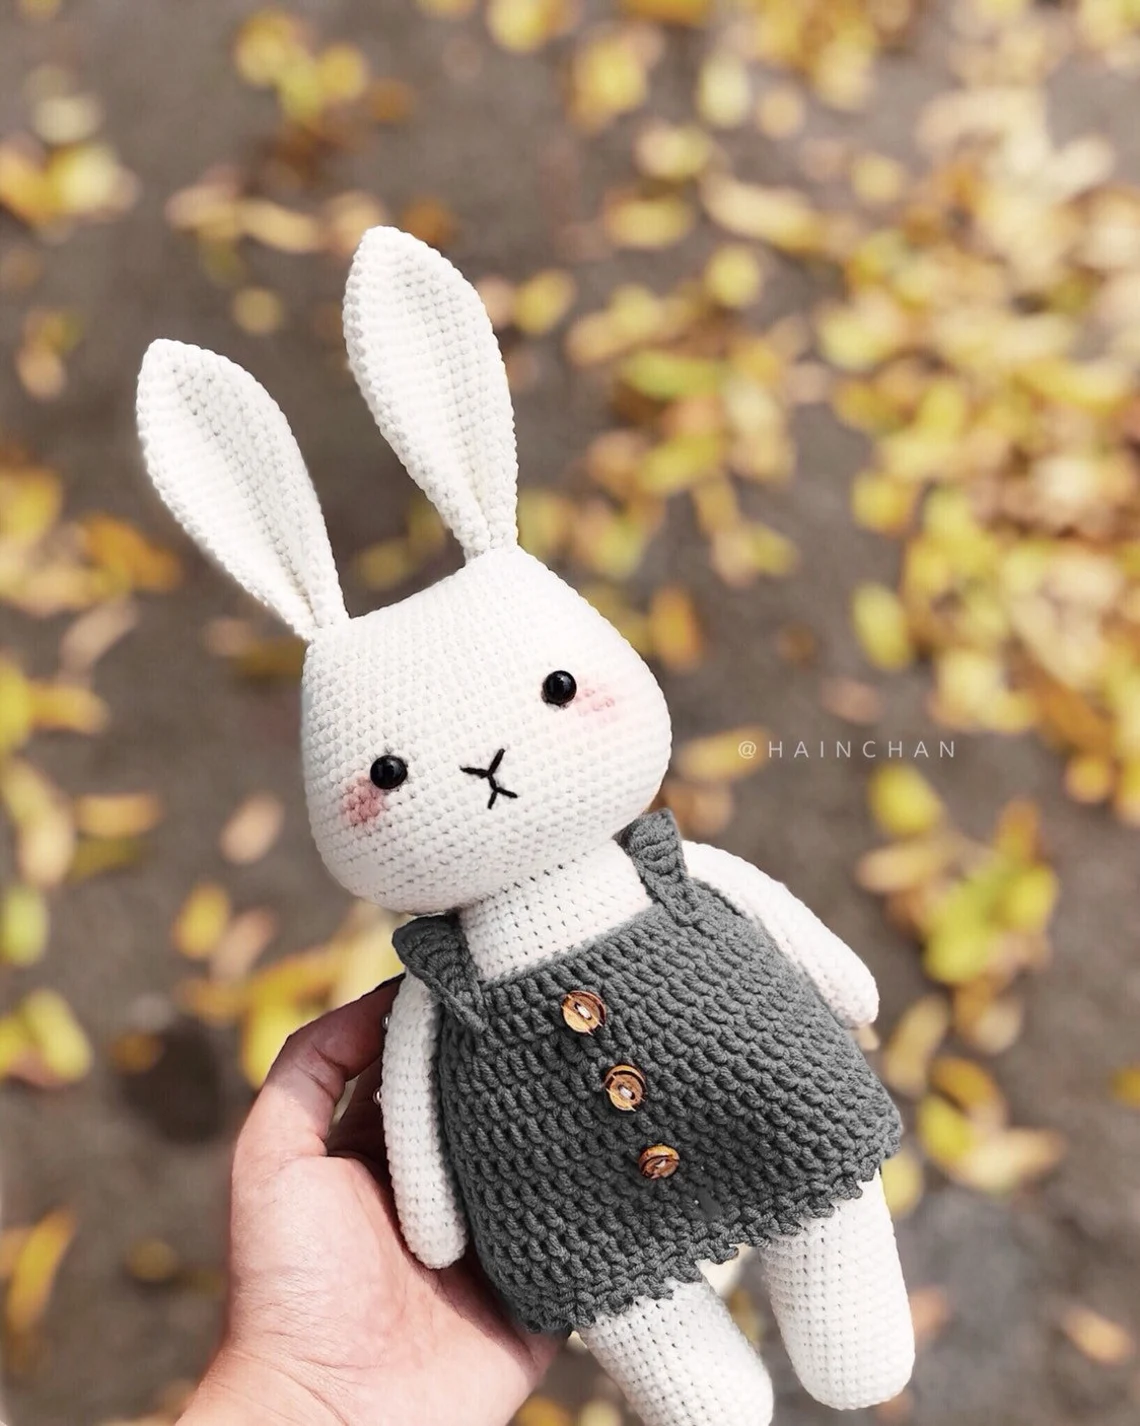 Create Your Own Nana the Bunny Crochet Pattern – Amigurumi crochet pattern. Instant download. Languages: English